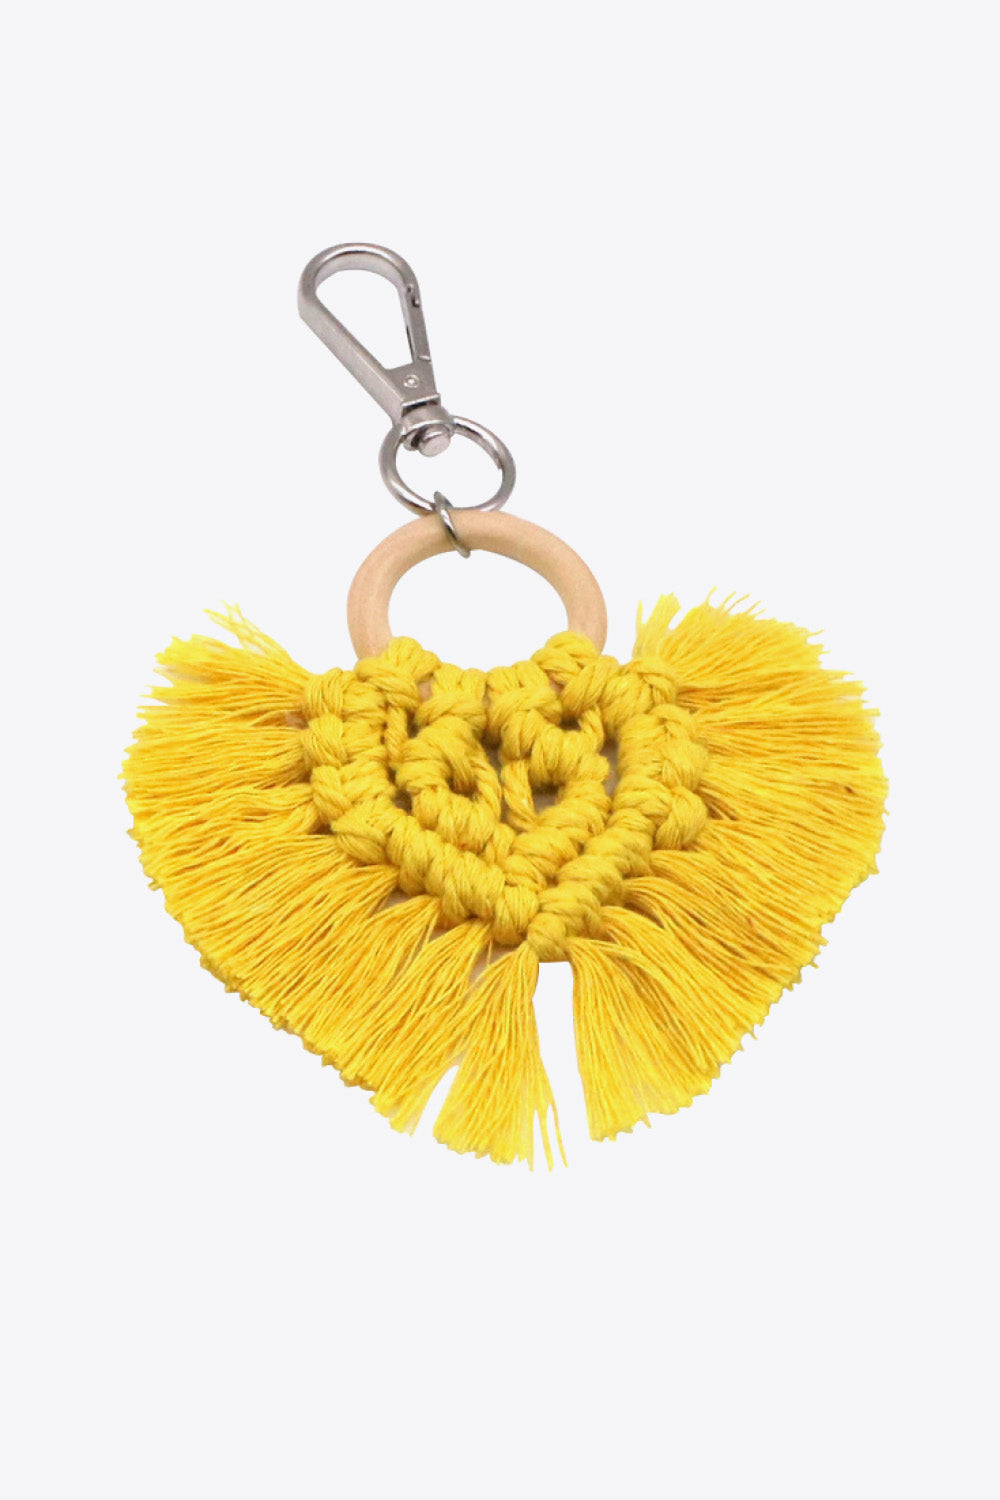 Trendsi Cupid Beauty Supplies Mustard / One Size Keychains Assorted 4-Pack Heart-Shaped Macrame Fringe Keychain